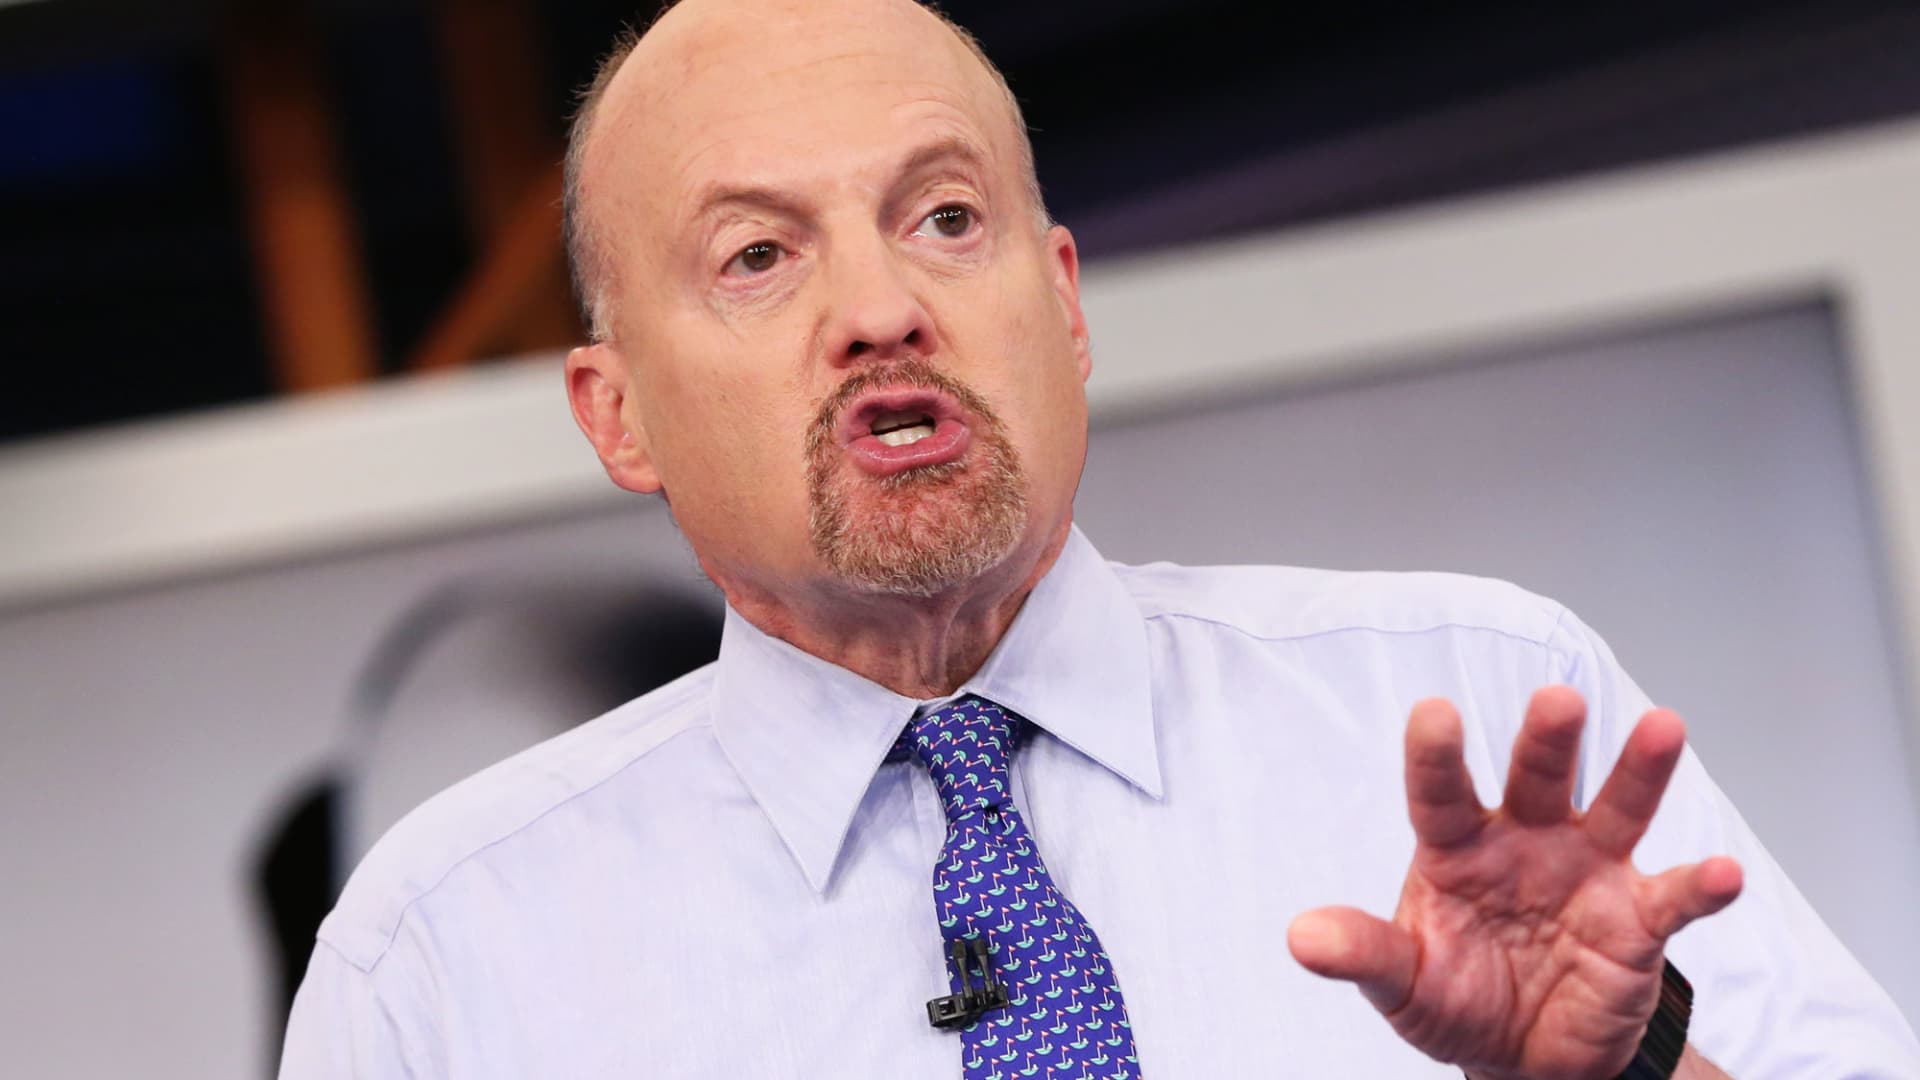 Jim Cramer says investors should not let a troubled market stop them from finding “better opportunities”